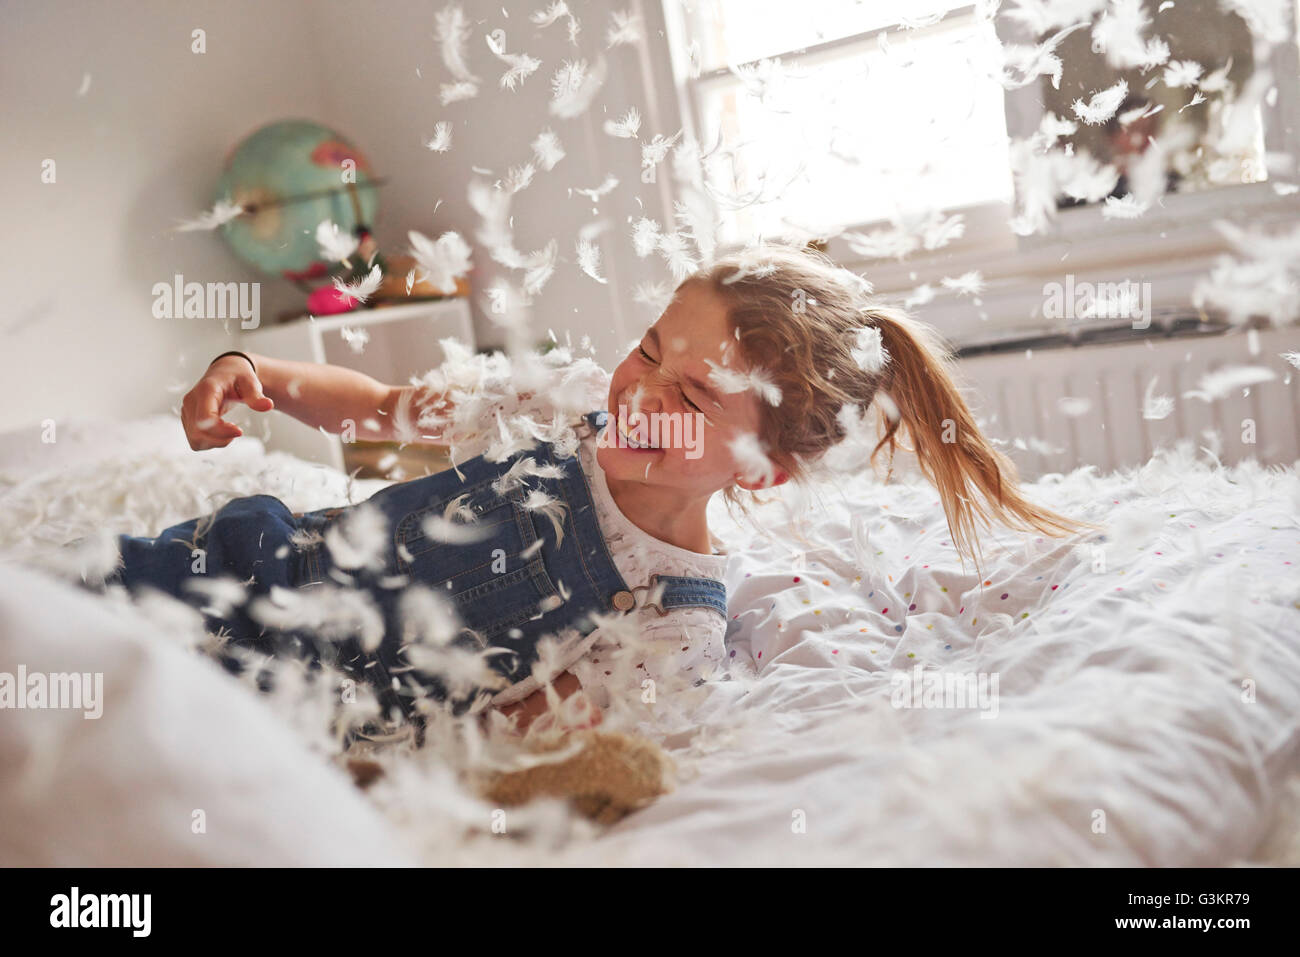 Girl falling on feather pillow fight bed Stock Photo